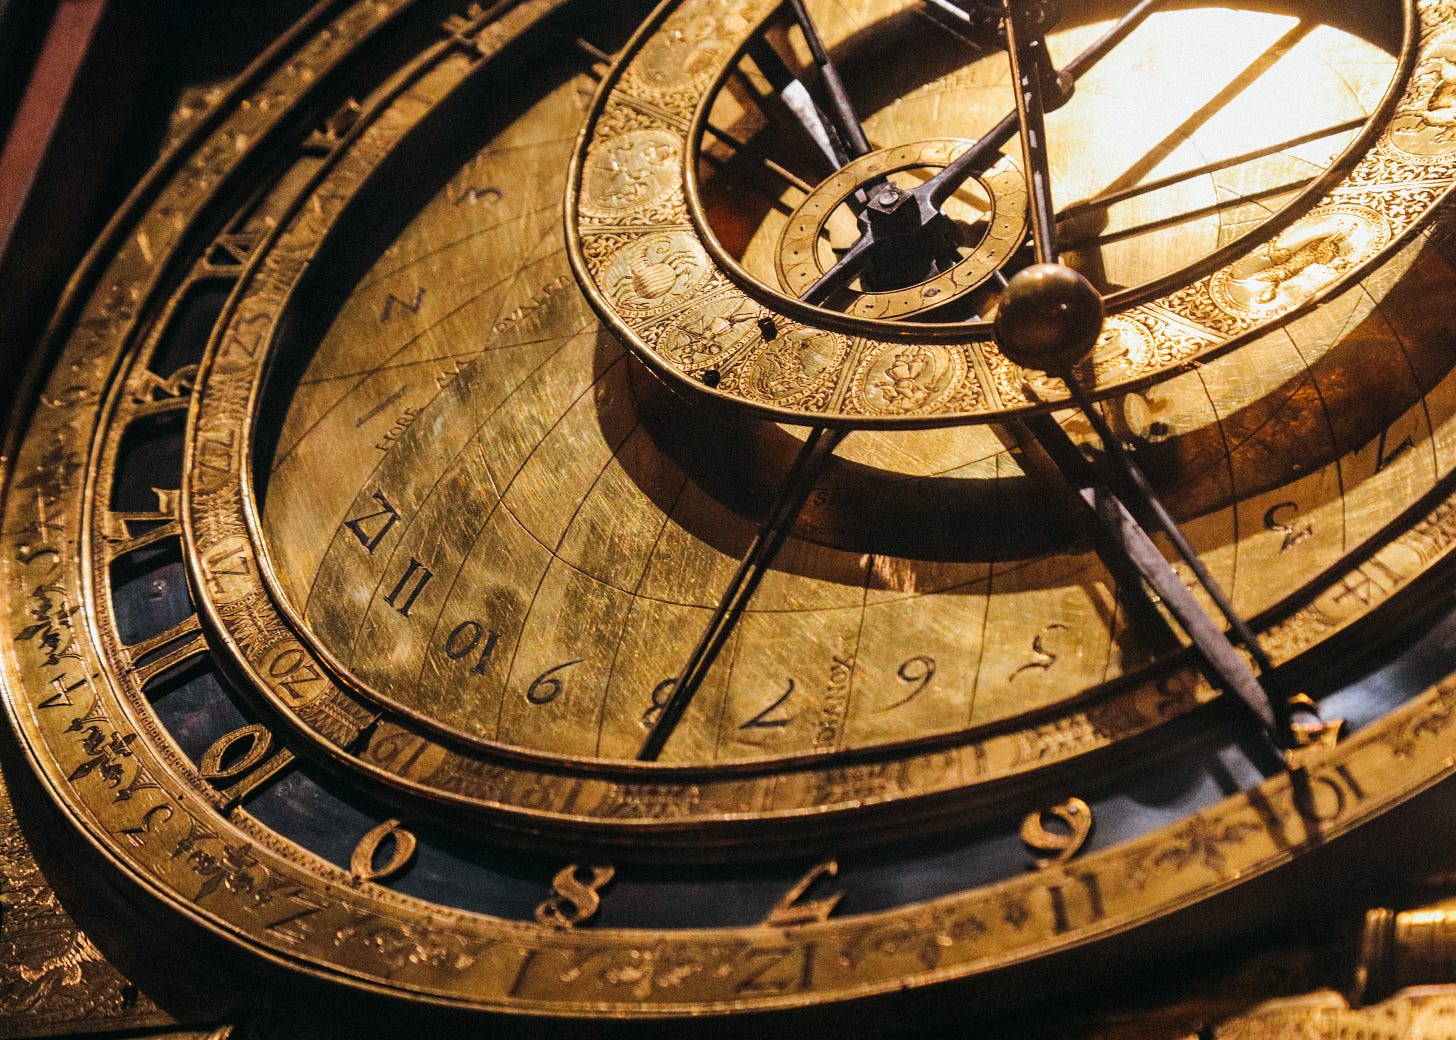 A close-up photo of a complex brass clock face, including several offset rings showing time, zodiac, etc.